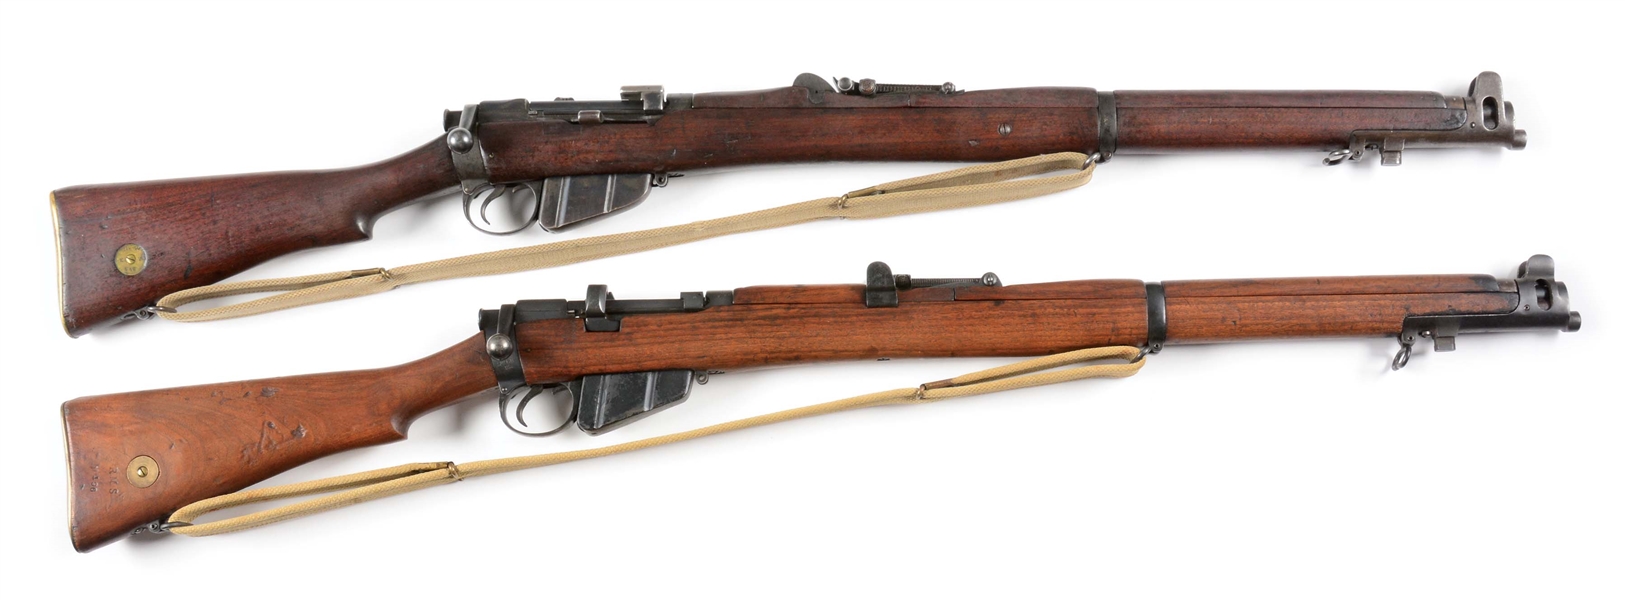 (C) LOT OF 2: BRITISH SHTLE .303 RIFLES - SPARKBROOK I*** 1905 AND ENFIELD III* 1928.